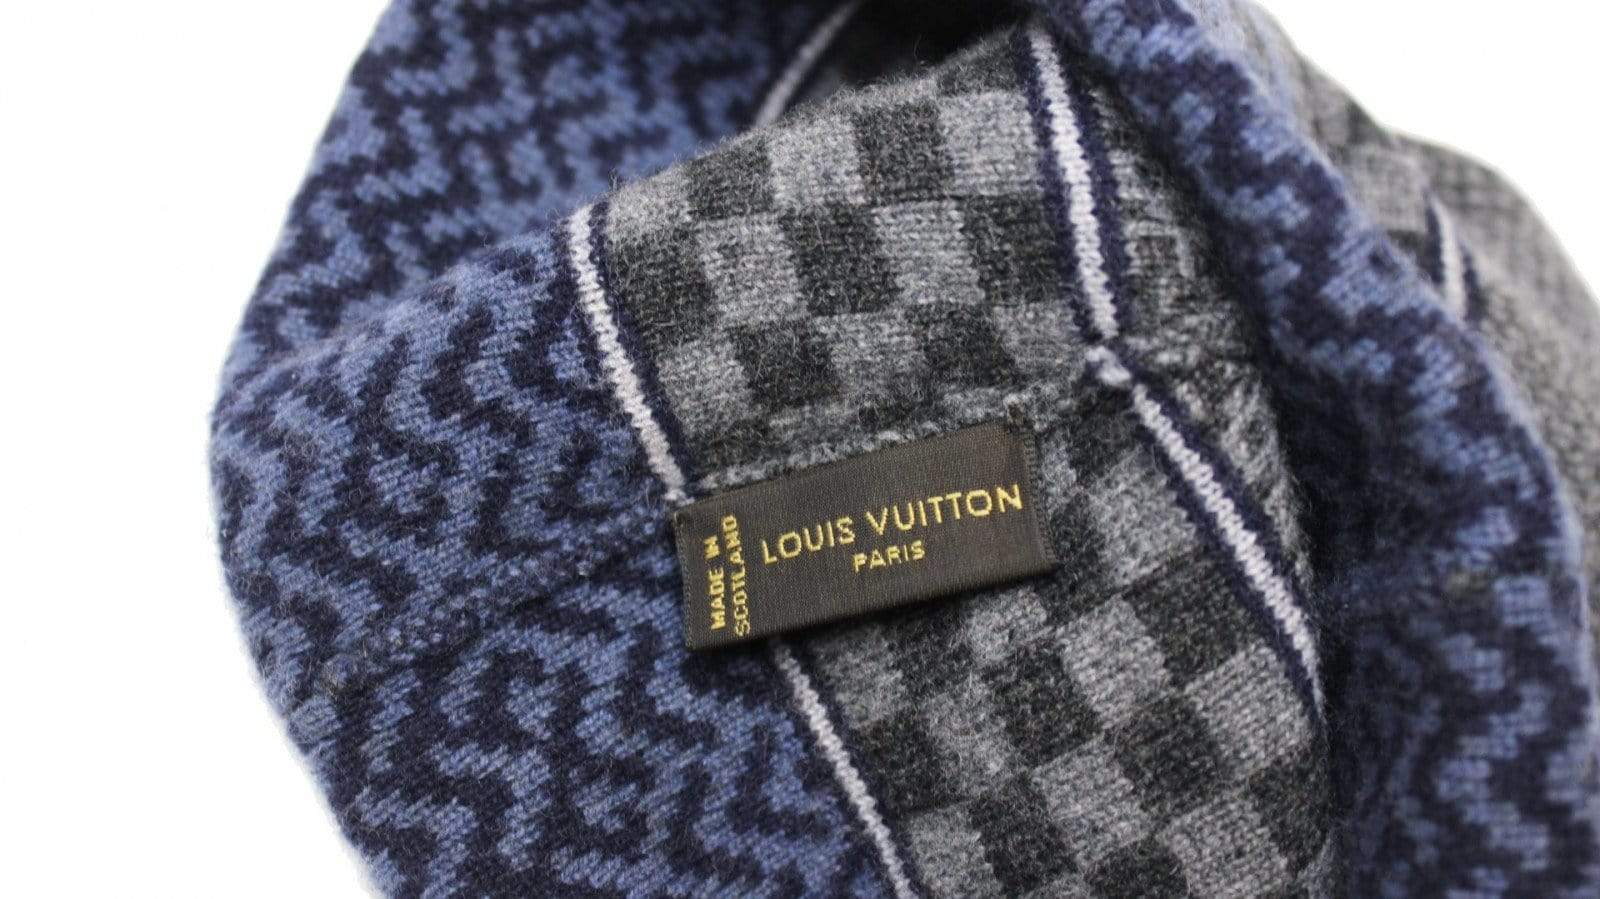 my beanie and scarf  Louis vuitton, Monogrammed scarf, Louis vuitton damier